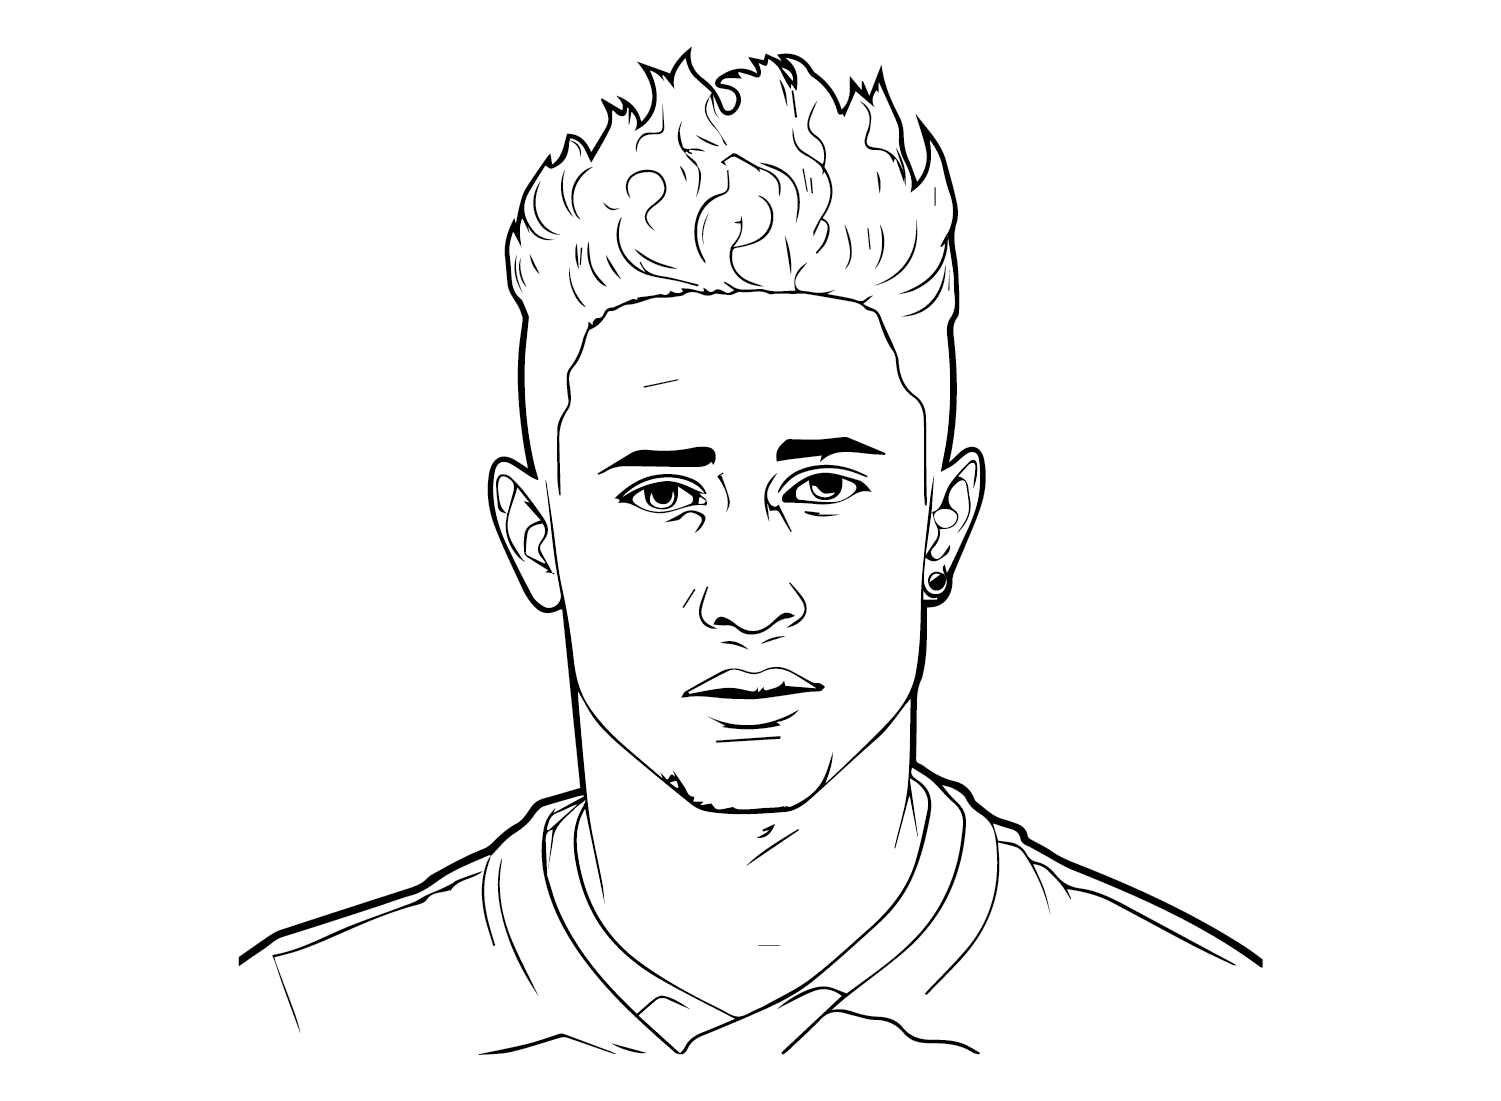 Neymar Coloring Pages for Kids and Adults